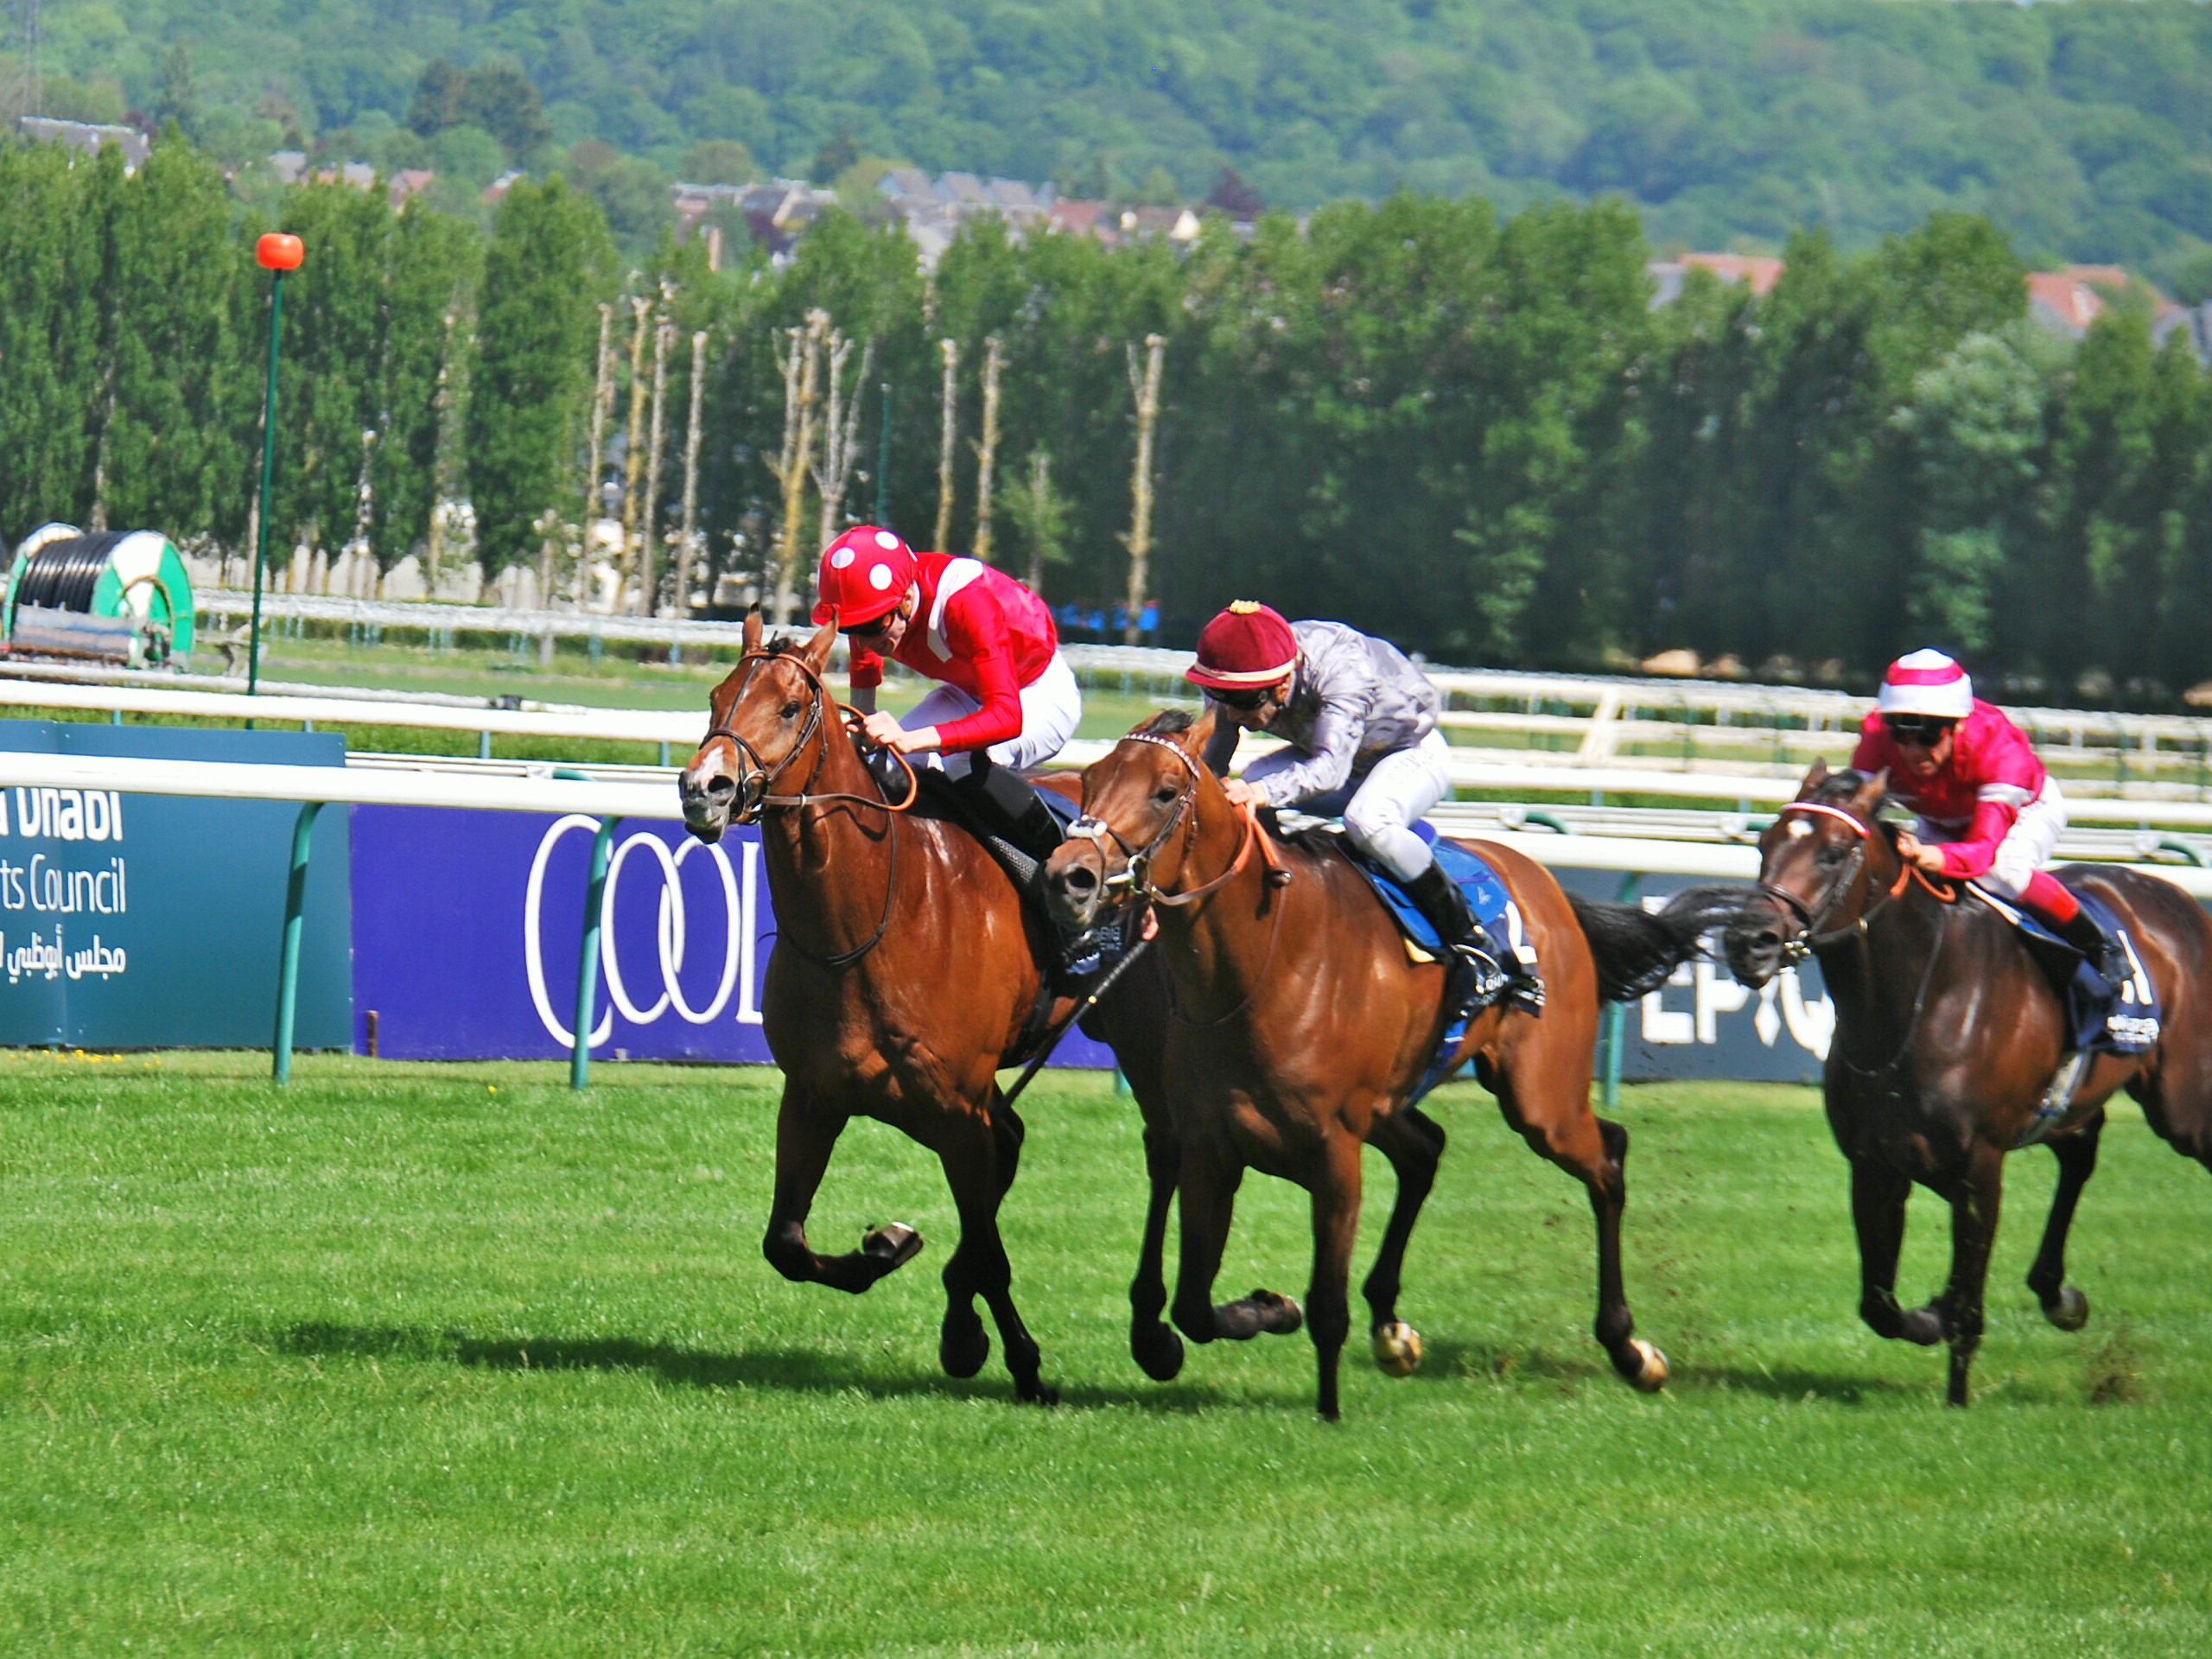 Contender: Brametot (centre) winning the Poule d’Essai des Poulains at Deauville from the Andre Fabre-trained Le Brivido (left) and Rivet. Photo: John Gilmore